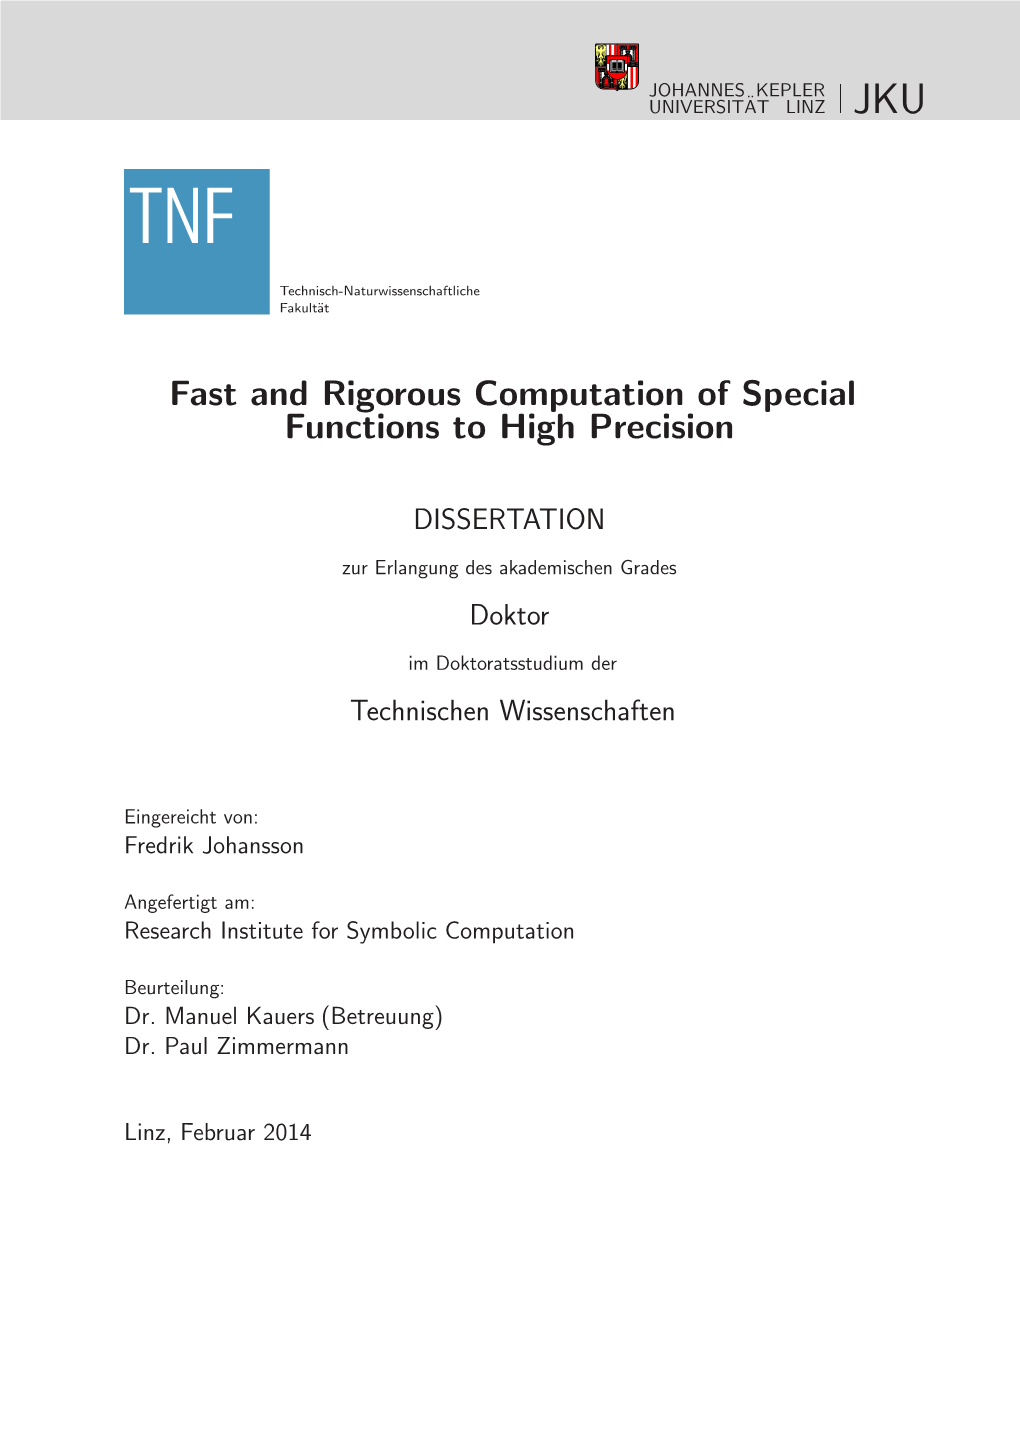 Fast and Rigorous Computation of Special Functions to High Precision